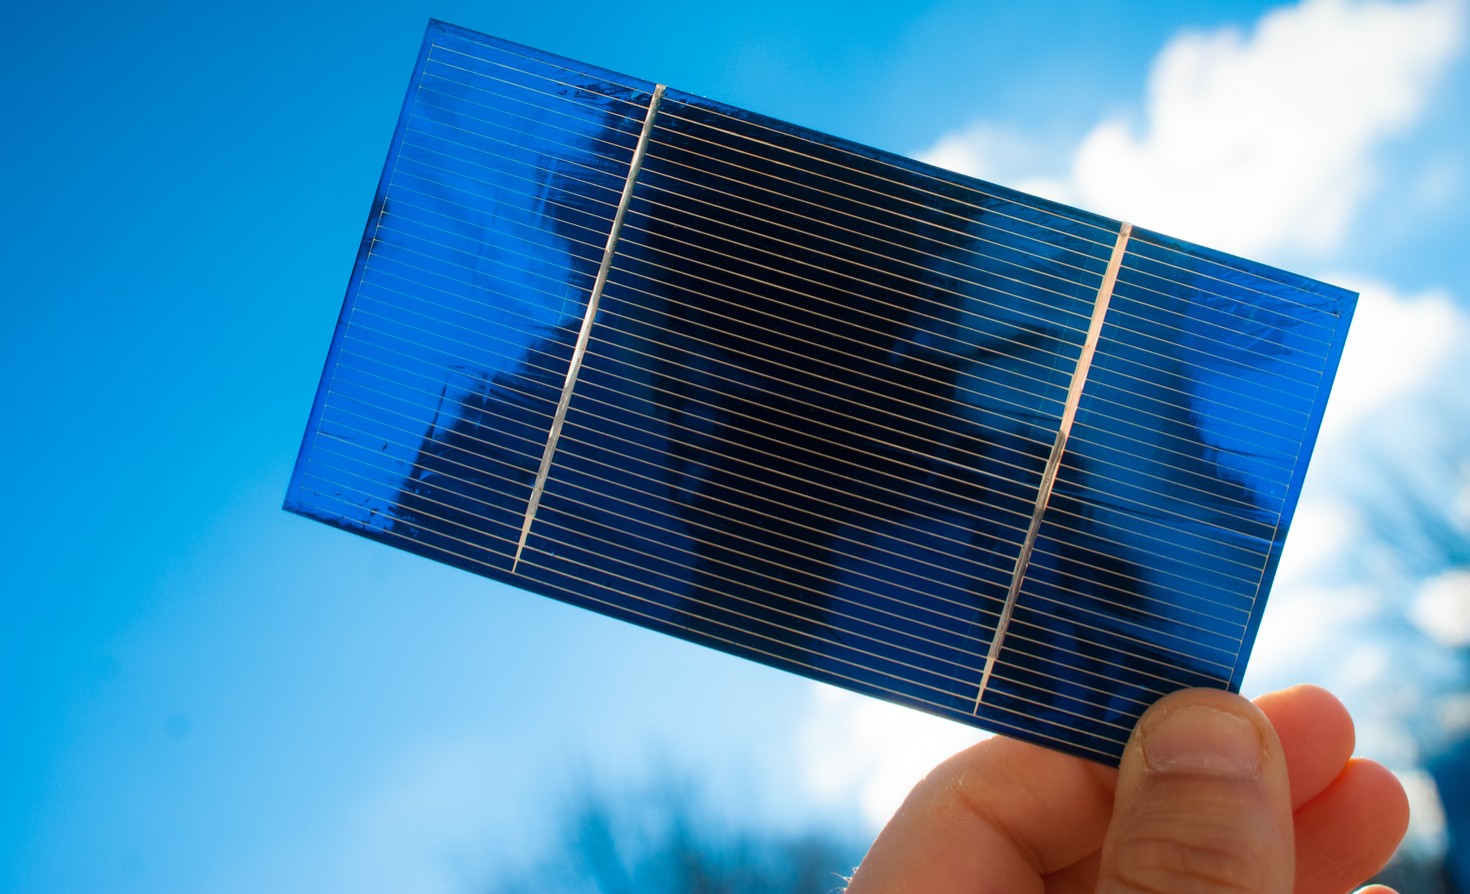 Advancements in Photovoltaic Technology